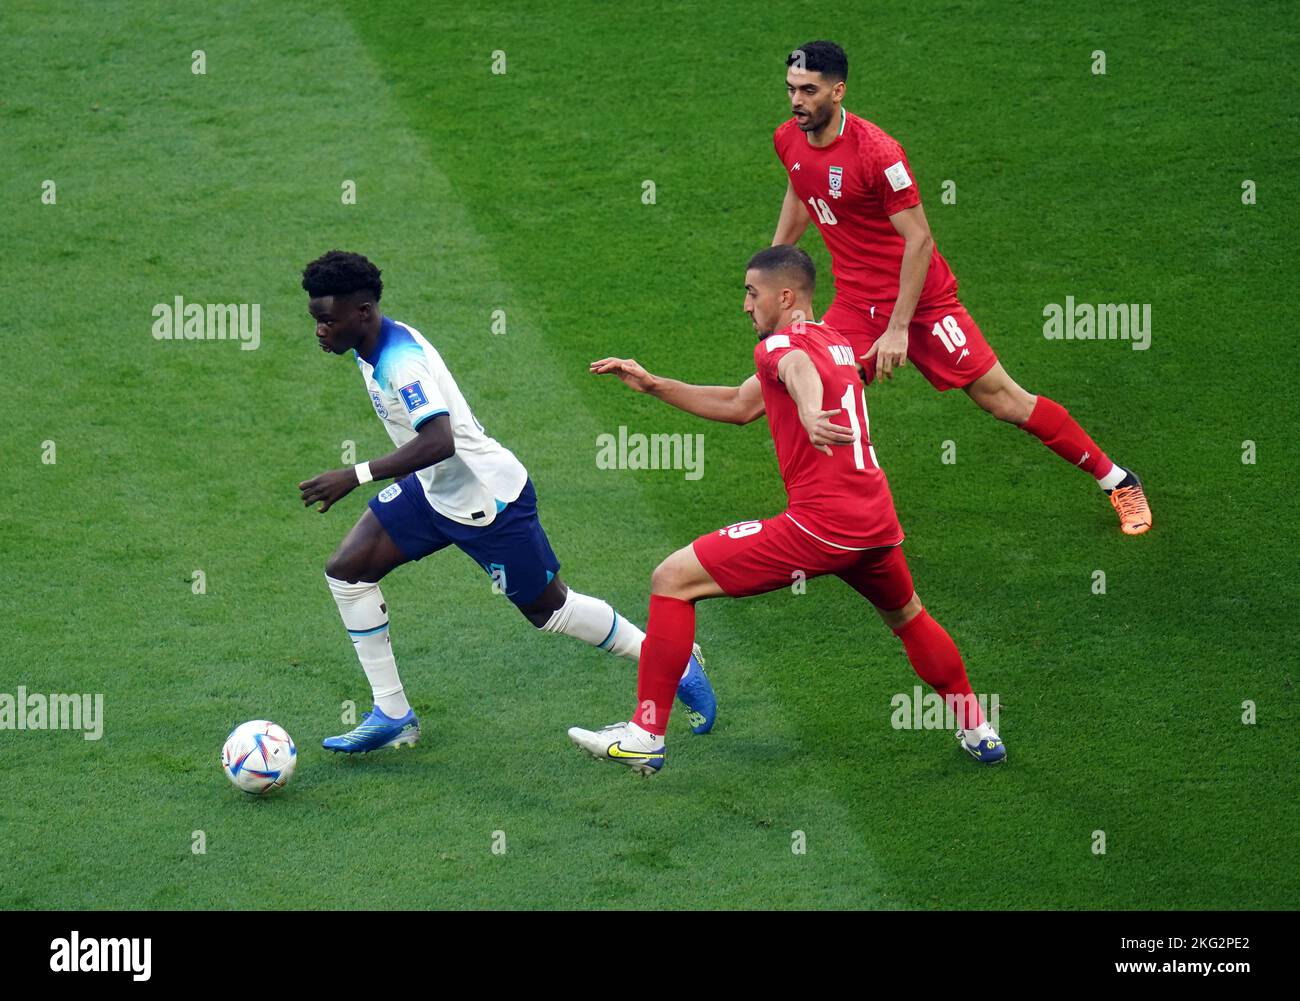 England's Bukayo Saka and Iran's Majid Hosseini (right) battle for the ball during the FIFA World Cup Group B match at the Khalifa International Stadium, Doha. Picture date: Monday November 21, 2022. Stock Photo